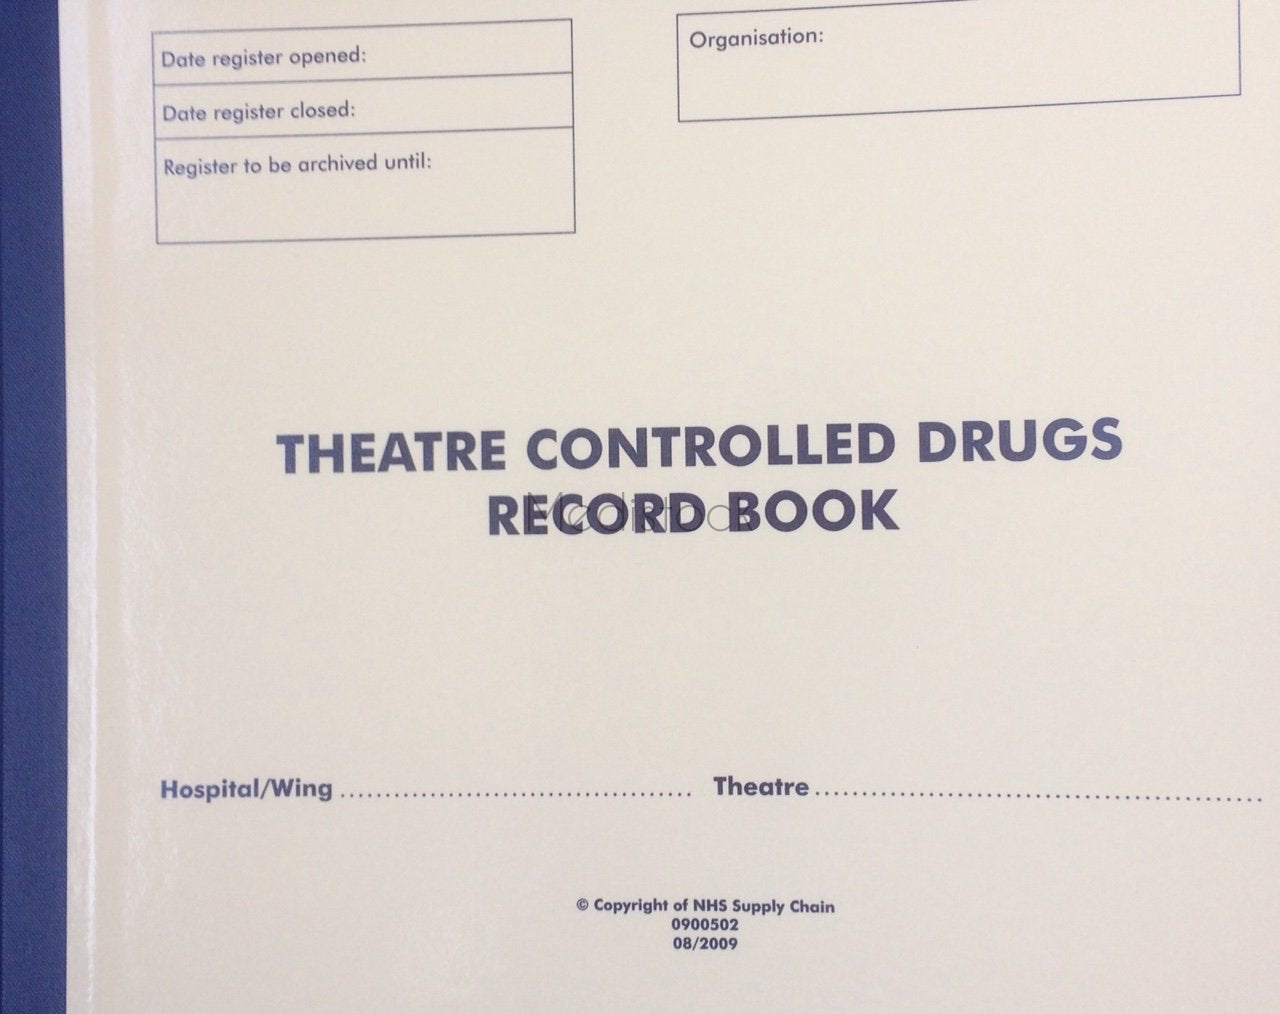 Operating Theatre Controlled Drugs Book, hard cover 150 pages, complies with new requirements of 3 signatures etc-Medistock Medical Supplies